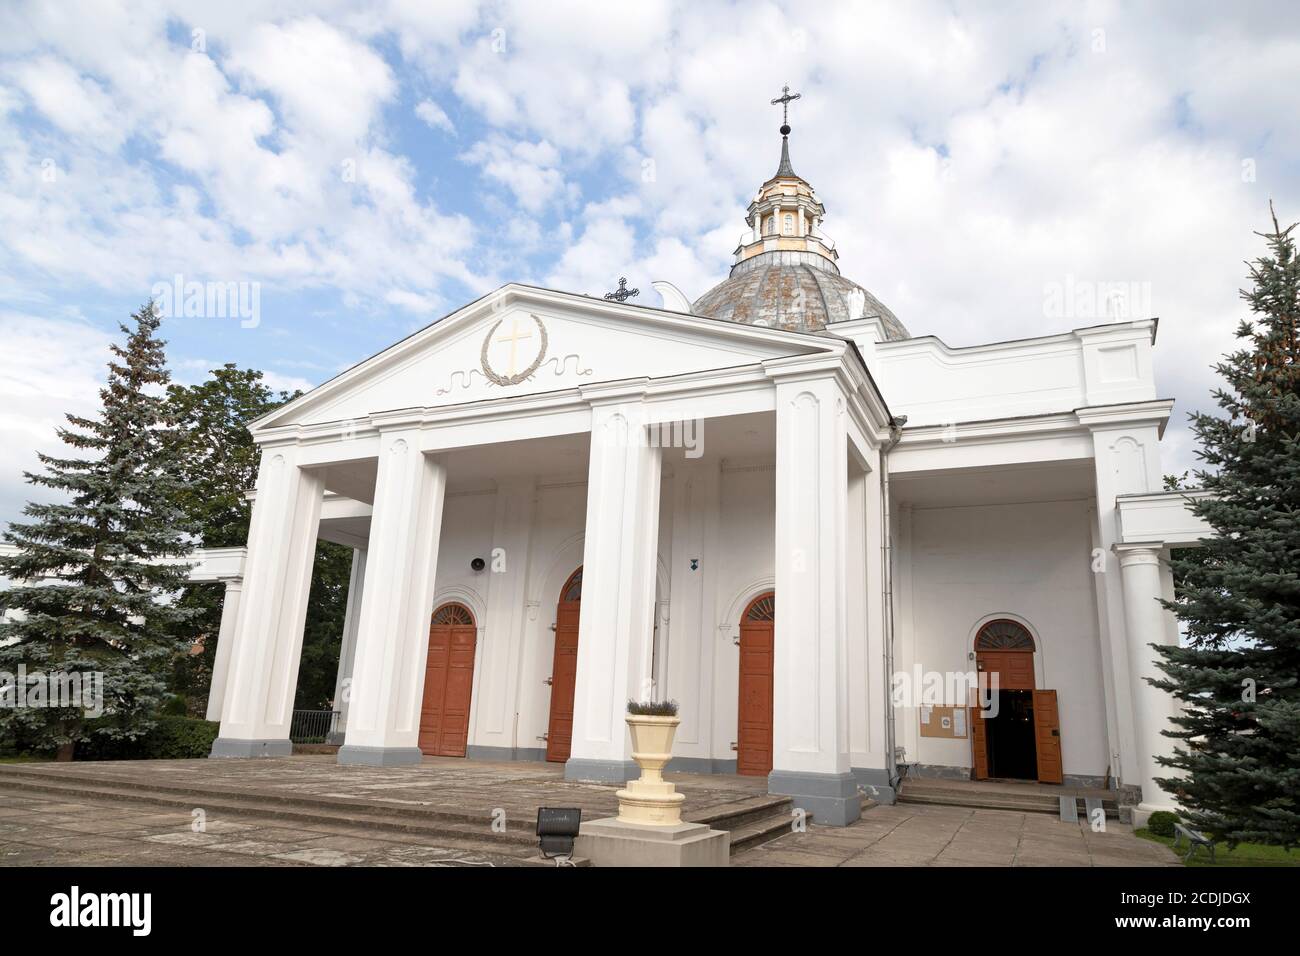 St. Peter's Church in Daugavpils, Latvia. The Roman Catholic place of worship is in the centre of Latvia's second city. Stock Photo